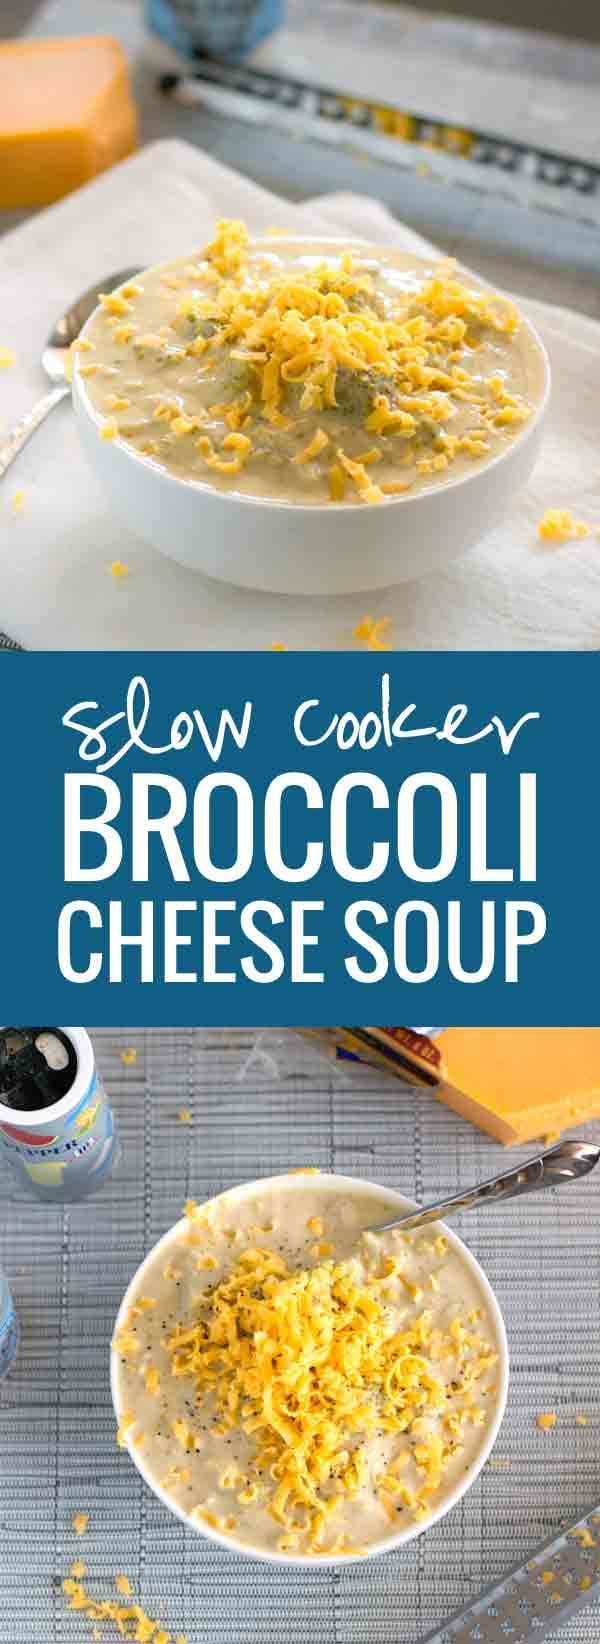 Slow Cooker Broccoli Cheese Soup - Super easy and full of cheesy flavor | pinchofyum.com